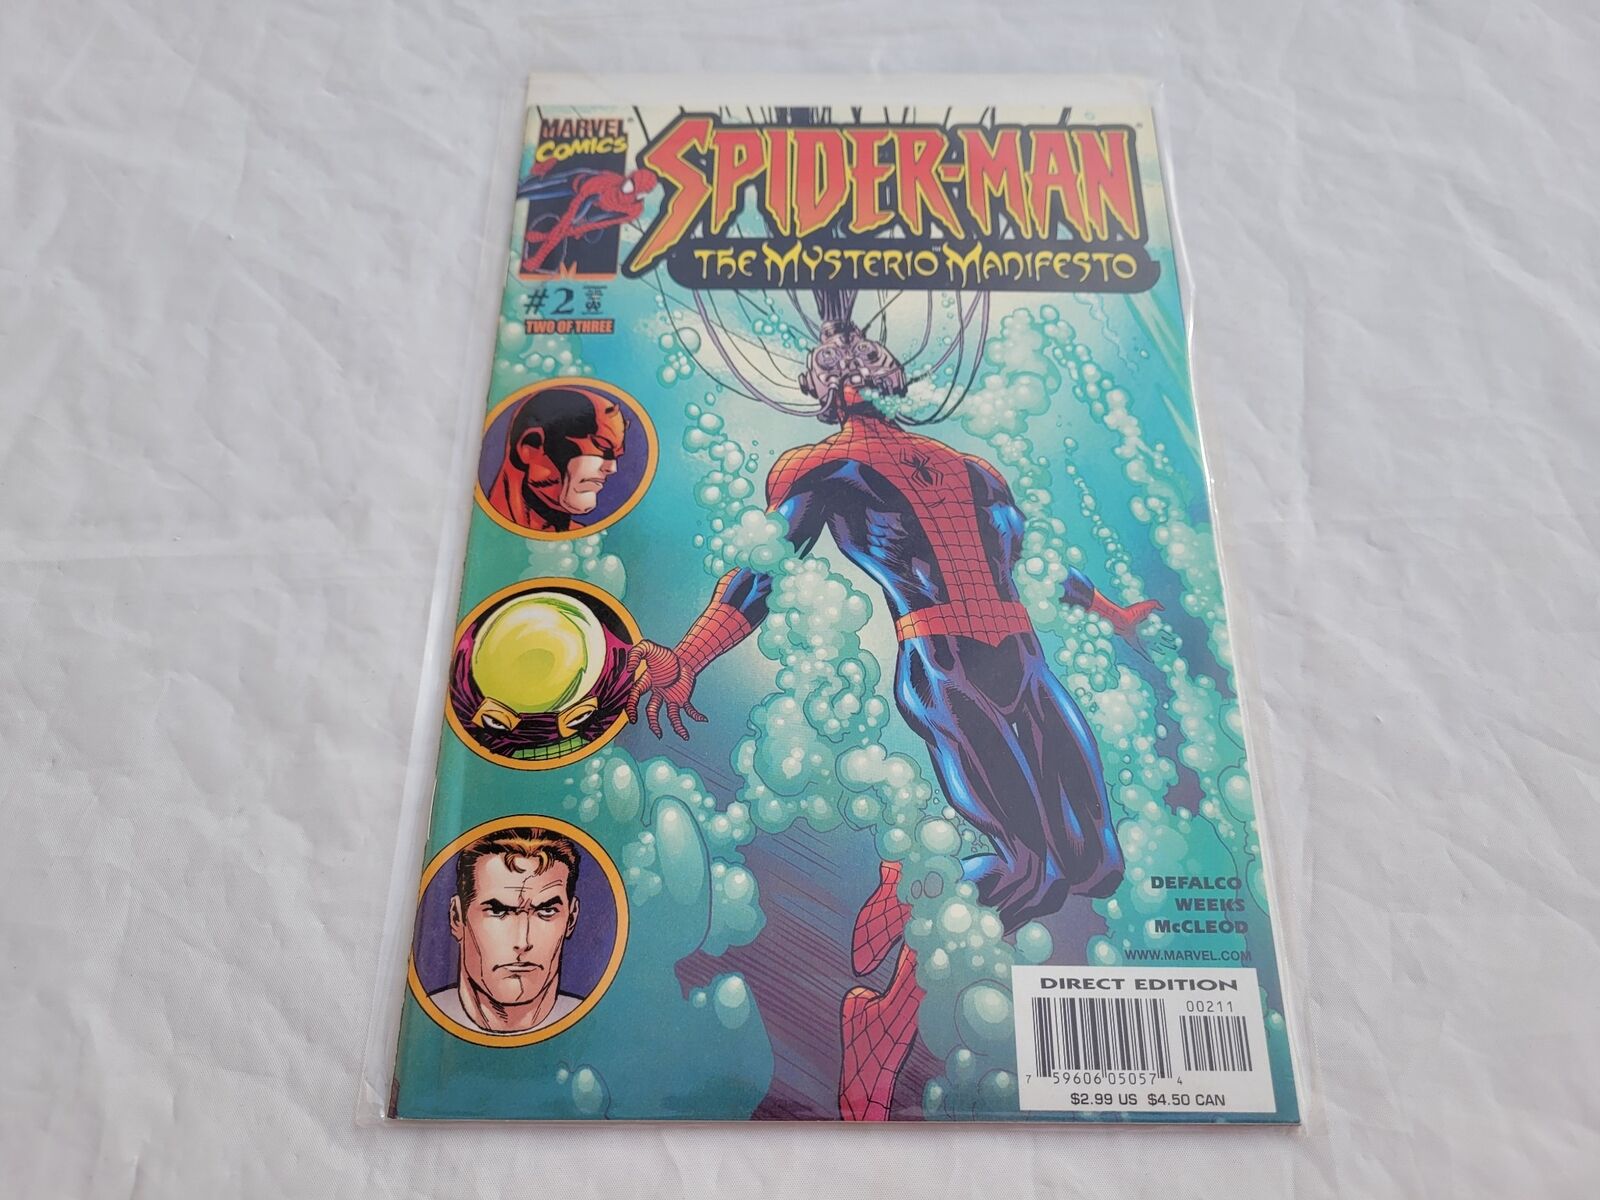 Ultimate Spider Man Issue Number 2 of 3 Marvel Comics The Mysterio Manifesto